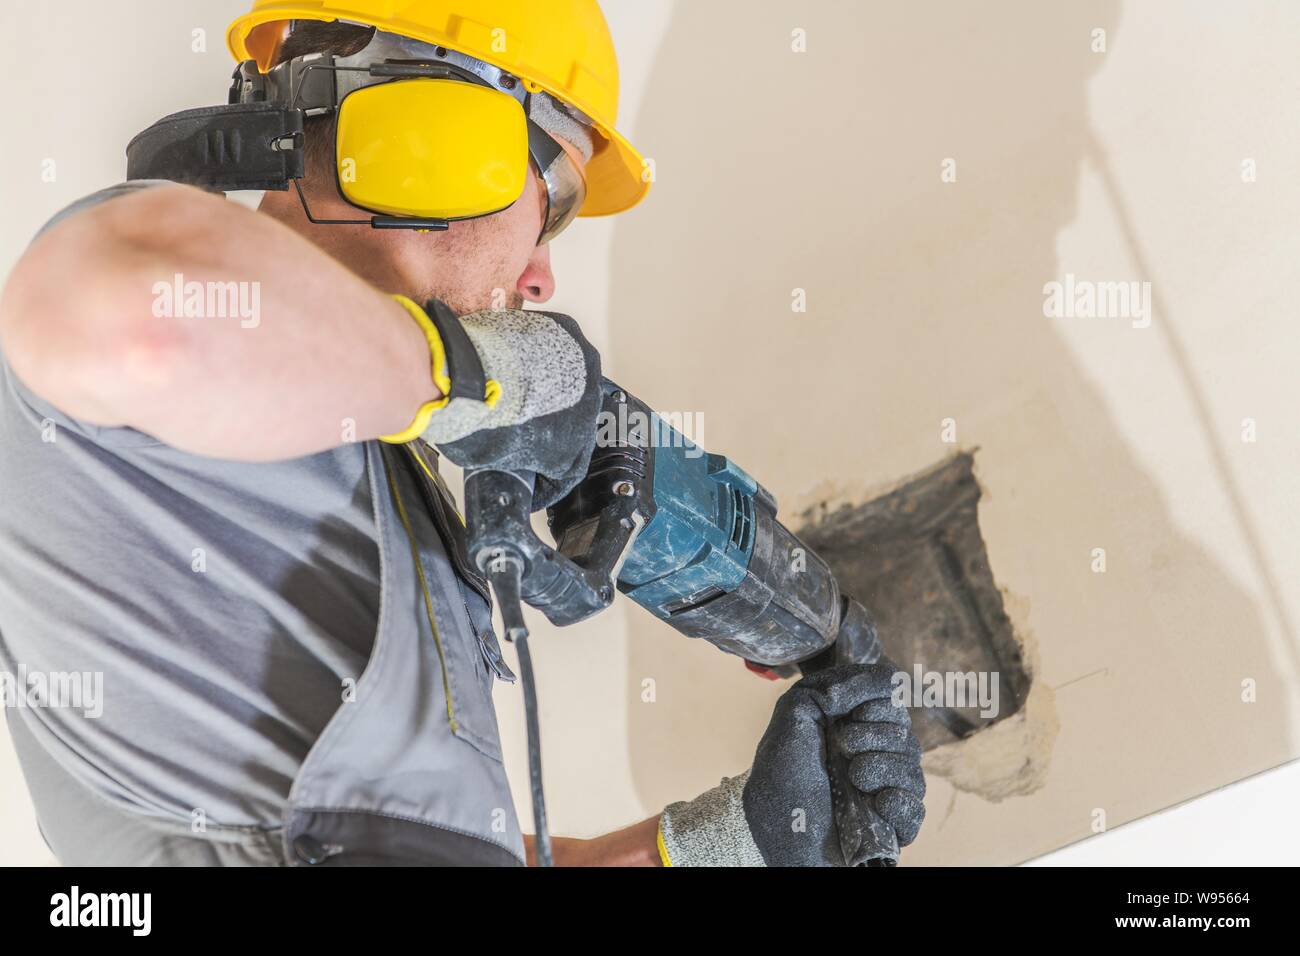 Caucasian Worker Chiseling Concrete. Wearing Hard Hat and Noise Protection Headphones. Stock Photo